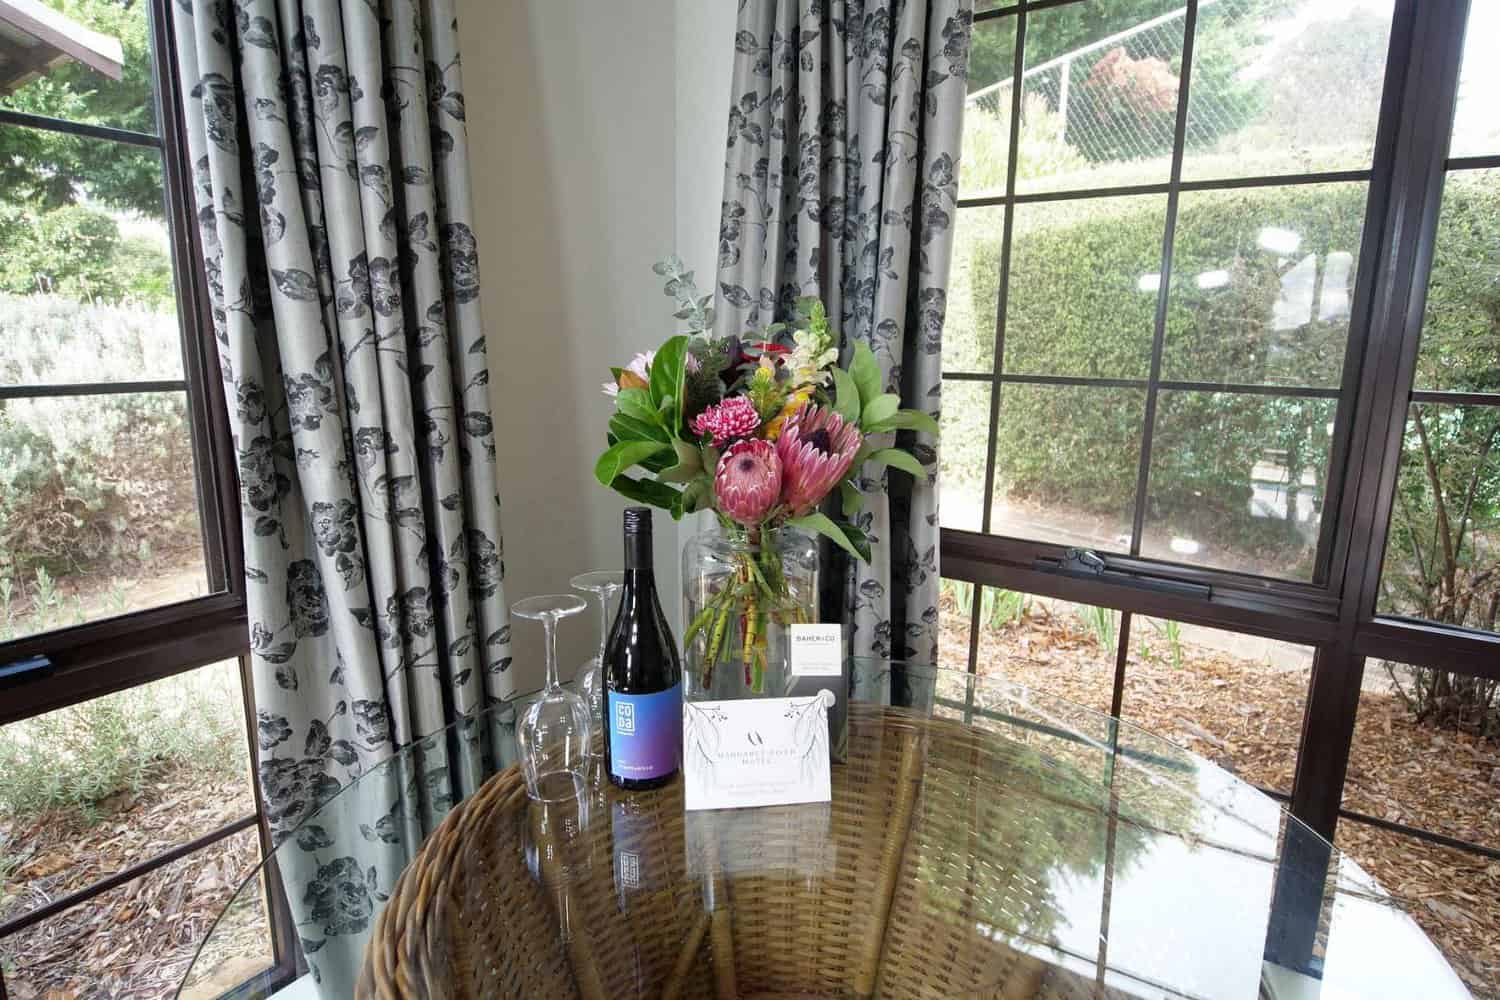 Elegant hotel room detail with a bottle of wine and two glasses on a glass-topped table, complemented by a vibrant bouquet of flowers, offering a welcoming atmosphere next to a window with garden views.